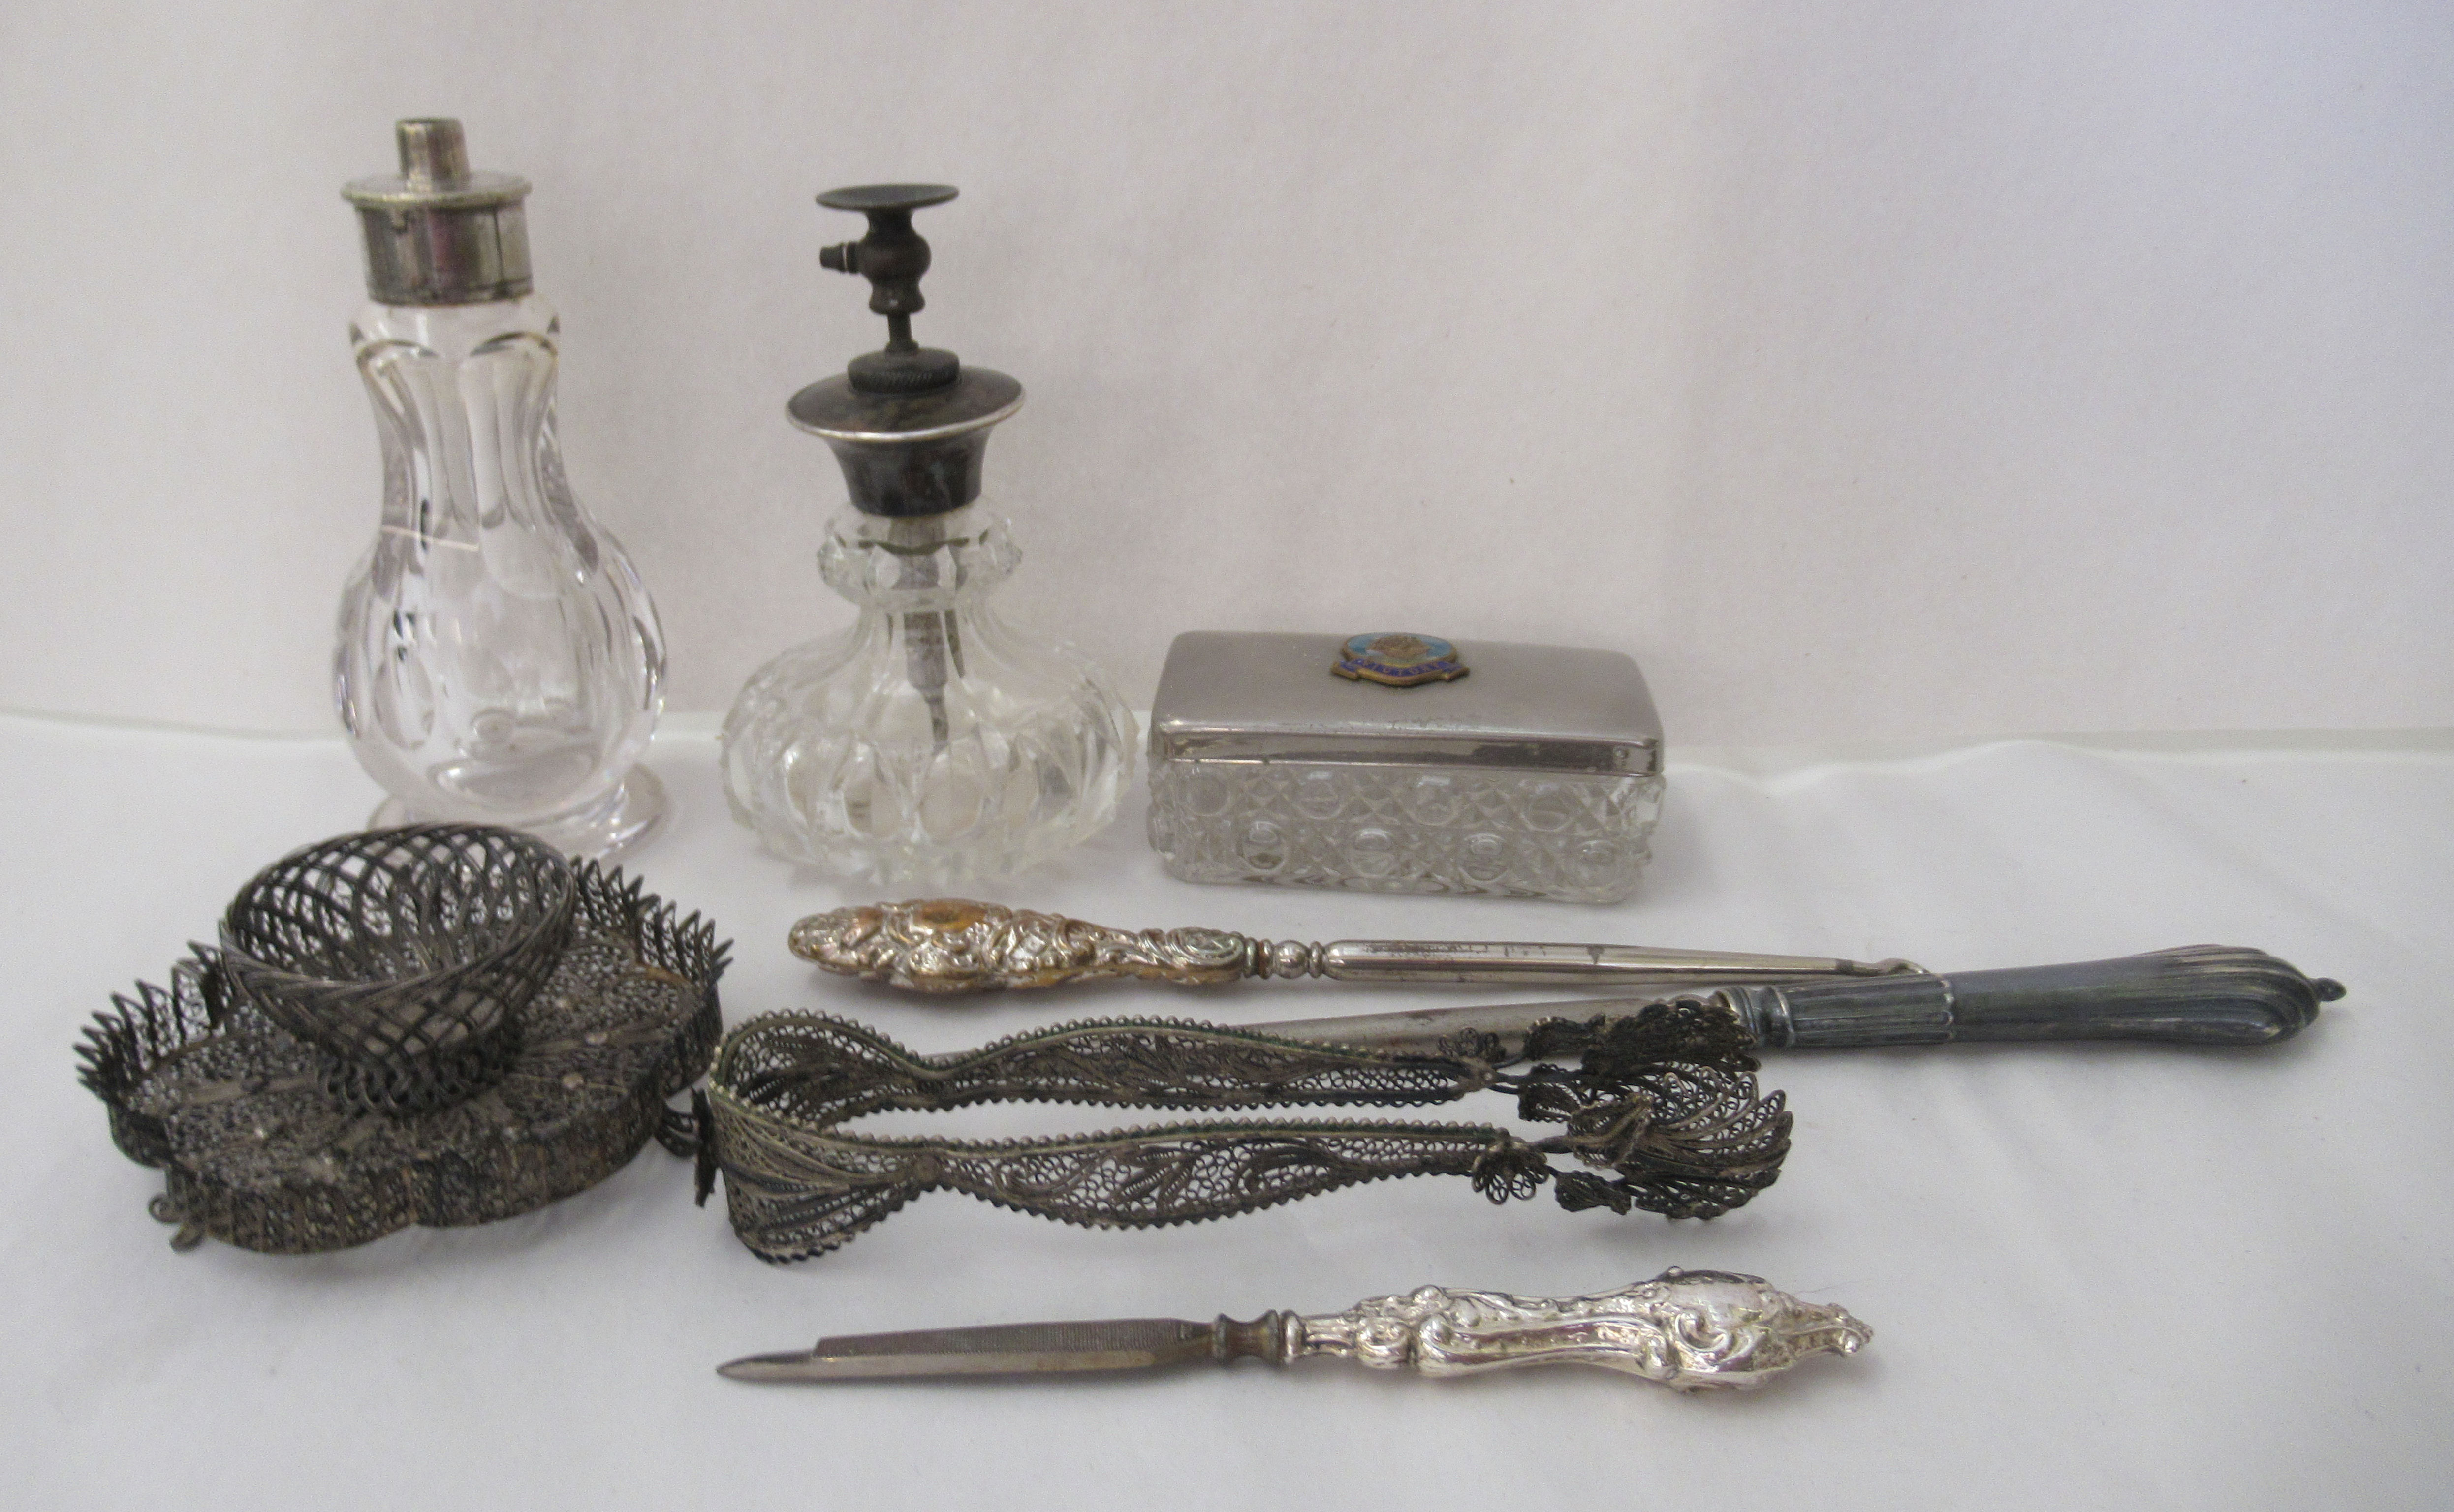 Dressing table accessories: to include filigree items; and tortoiseshell combs/hair grips - Image 2 of 3